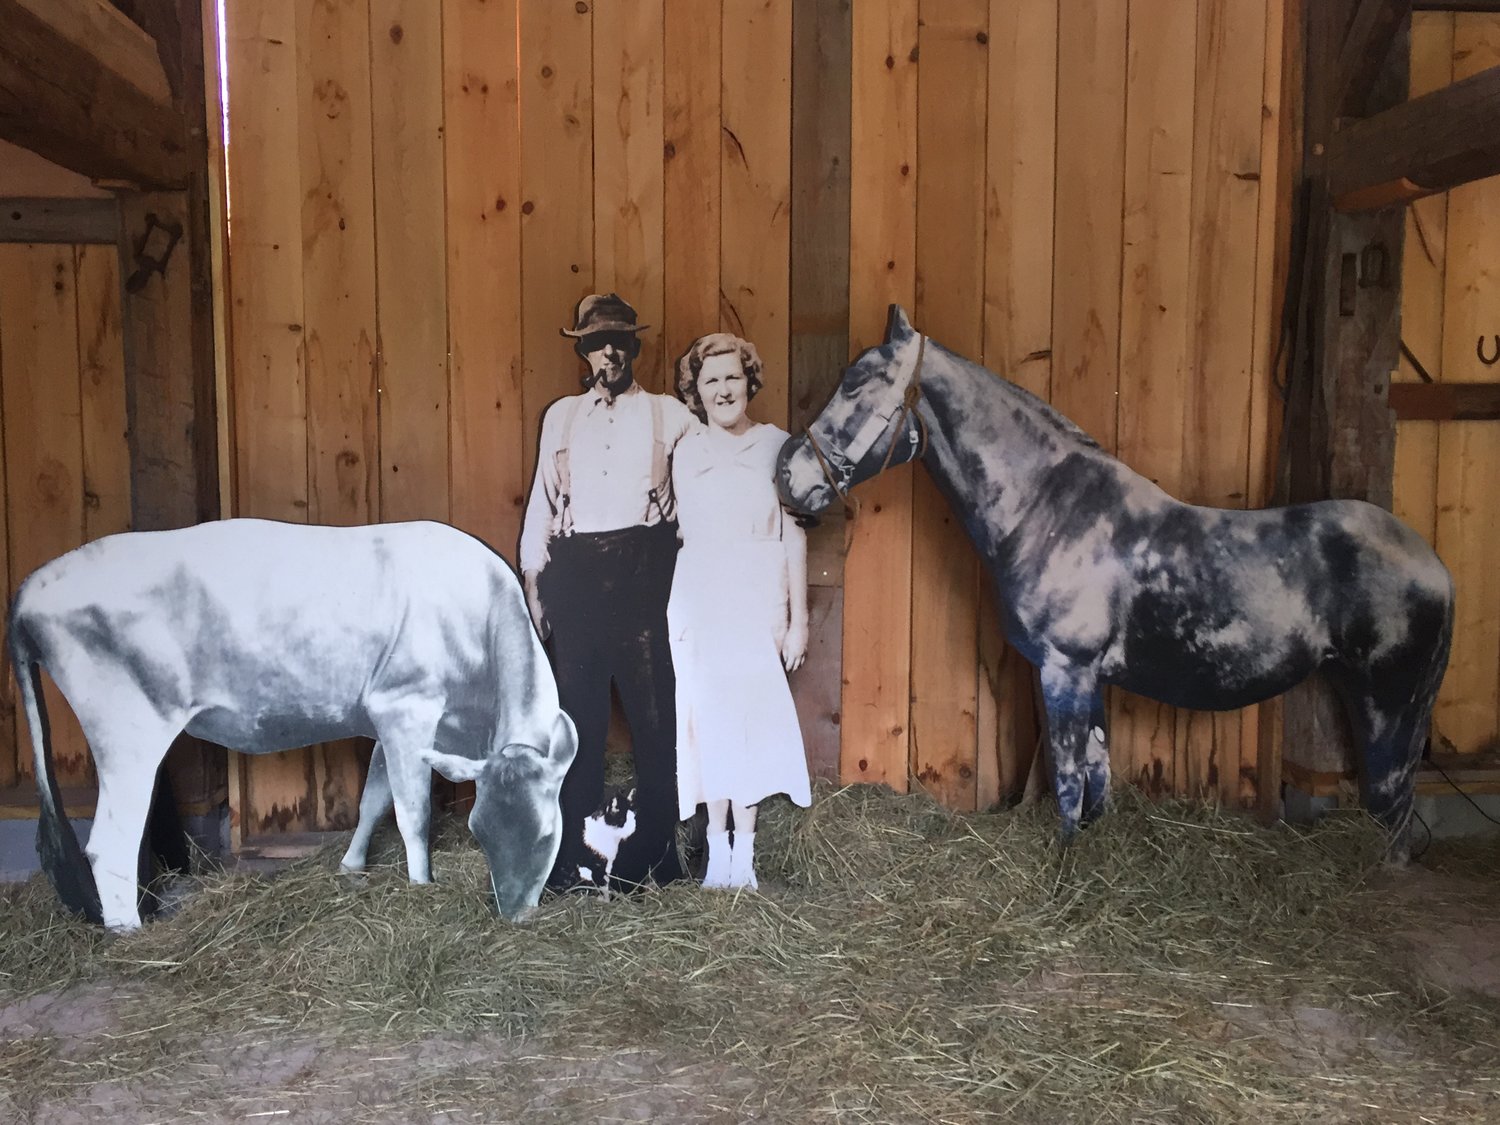 They're two-dimensional but you get the idea. The farm family hangs out in the barn at Time and the Valleys Museum.